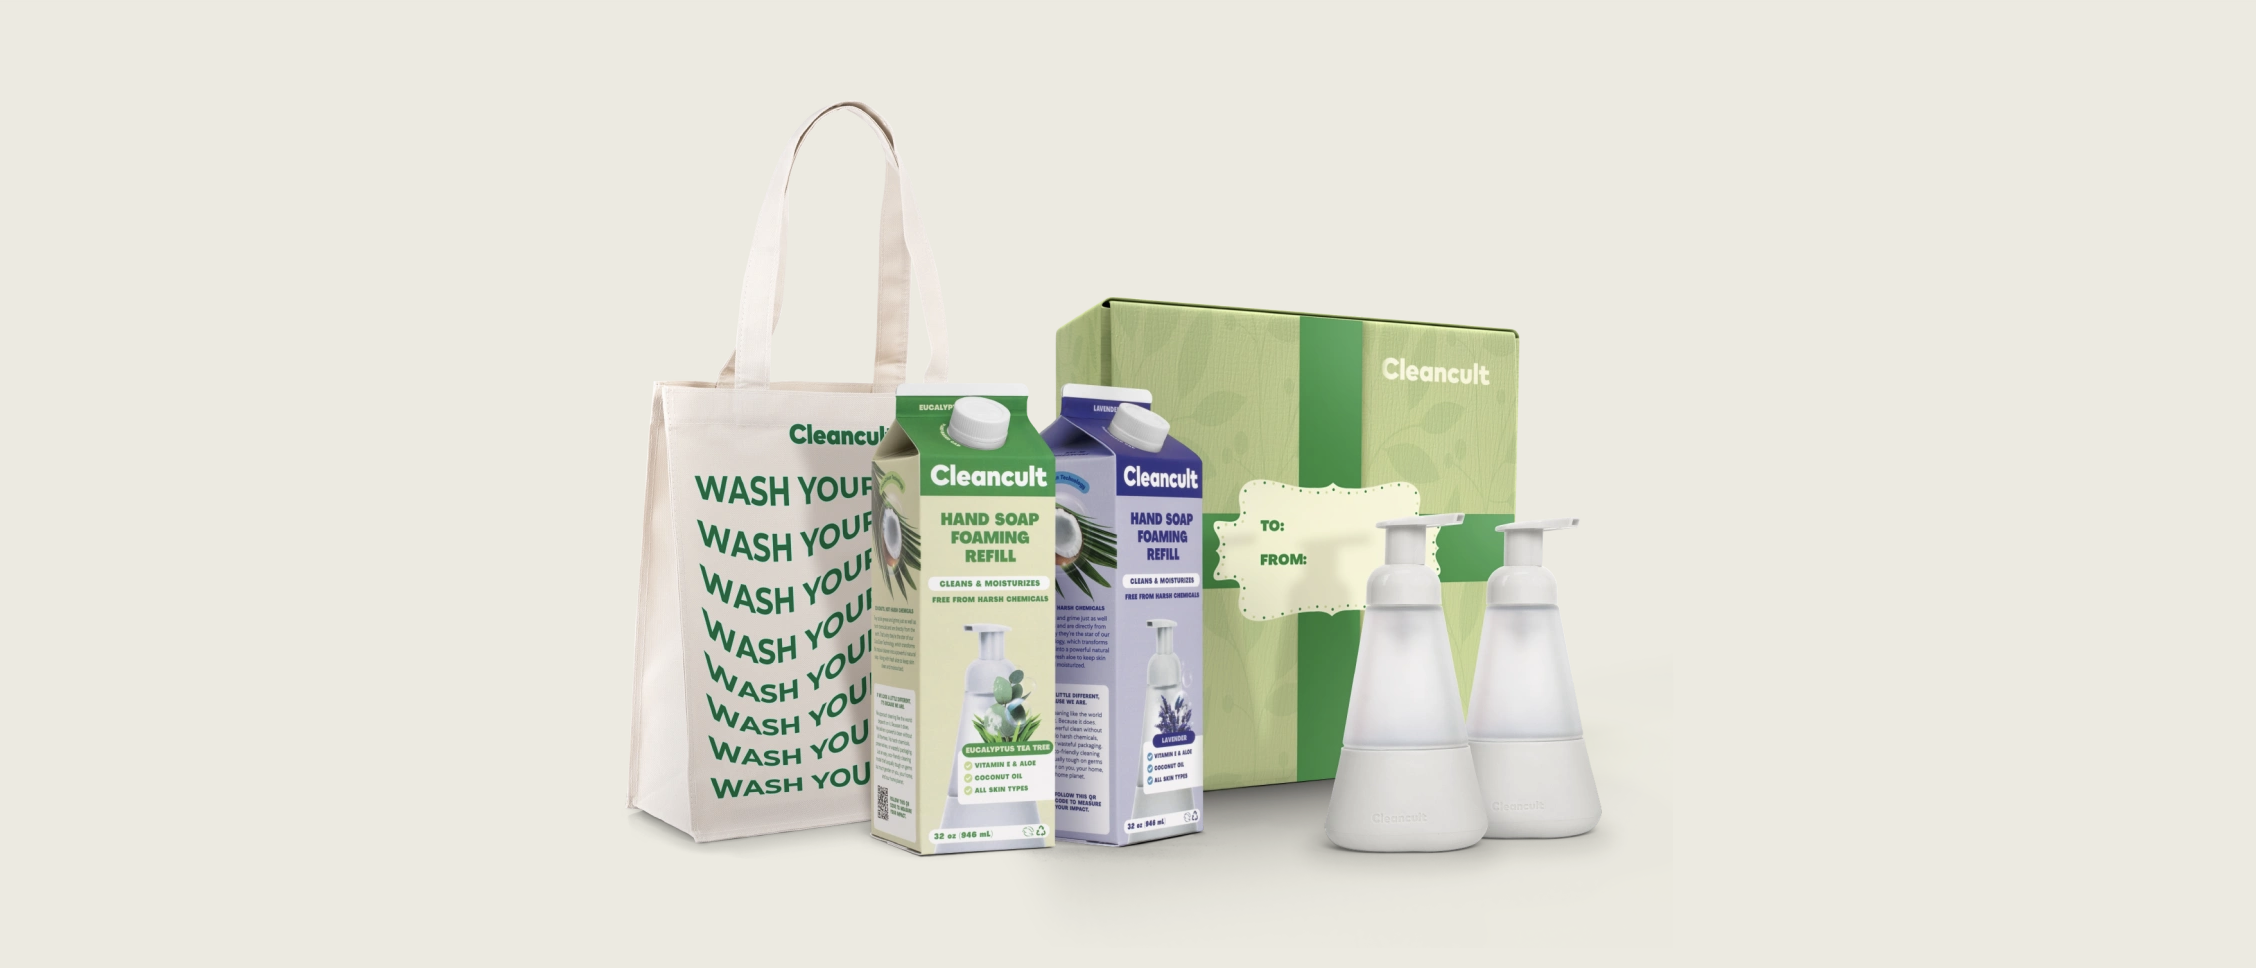 Cleancult Coupon: Get 40% Off This Bundle for Green Tuesday